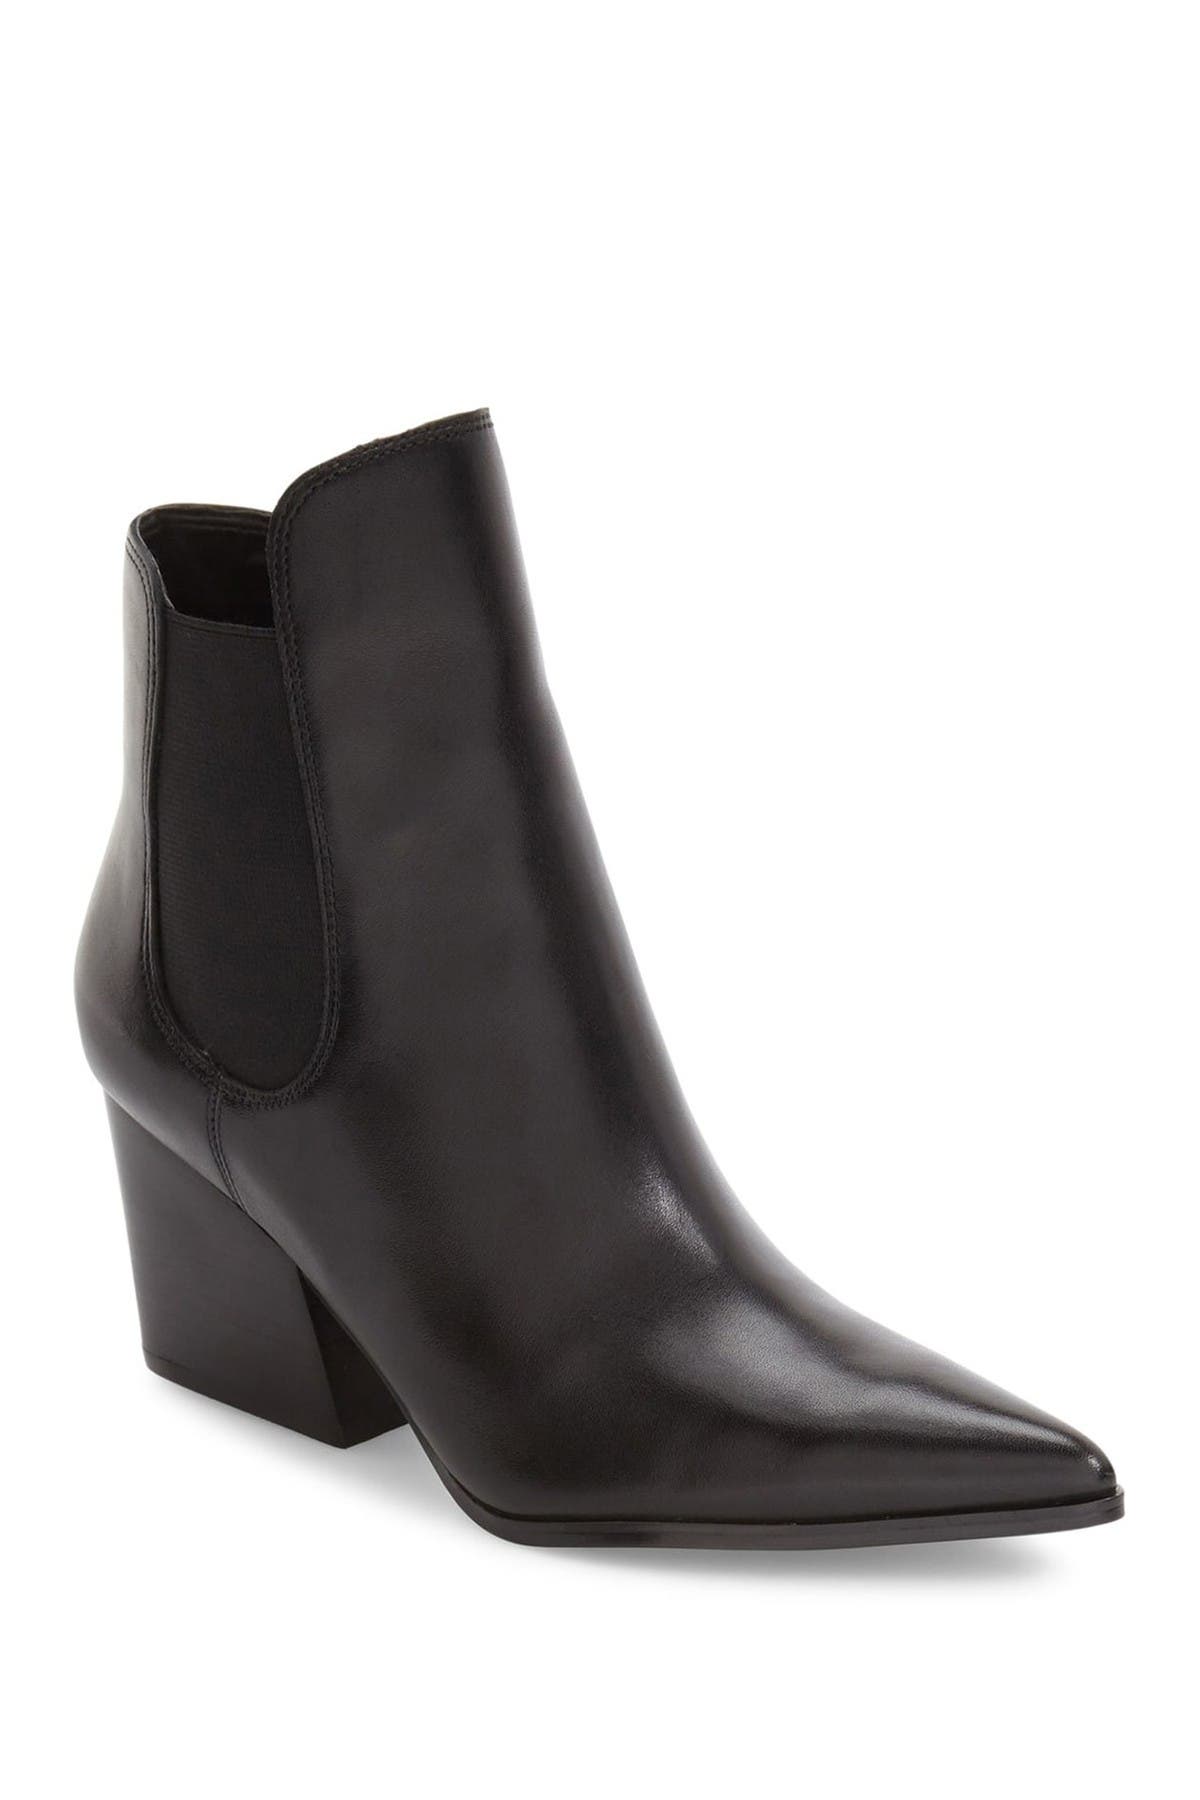 KENDALL AND KYLIE | Finley Chelsea Boot 